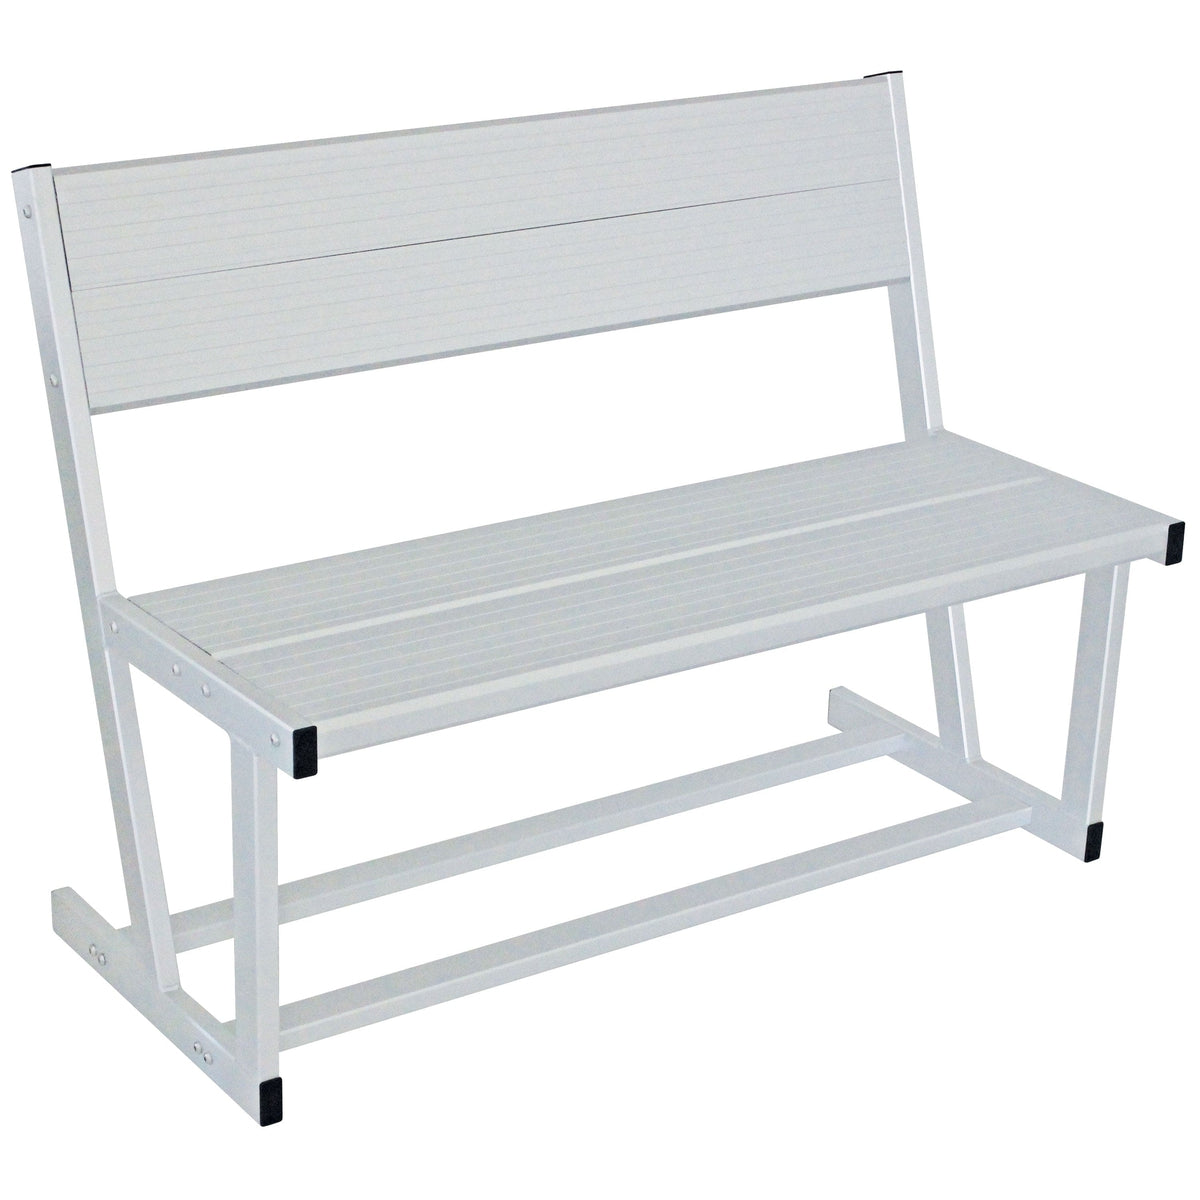 Extreme Max Not Qualified for Free Shipping Extreme Max Universal Aluminum Dock & Patio Bench #3006.6641